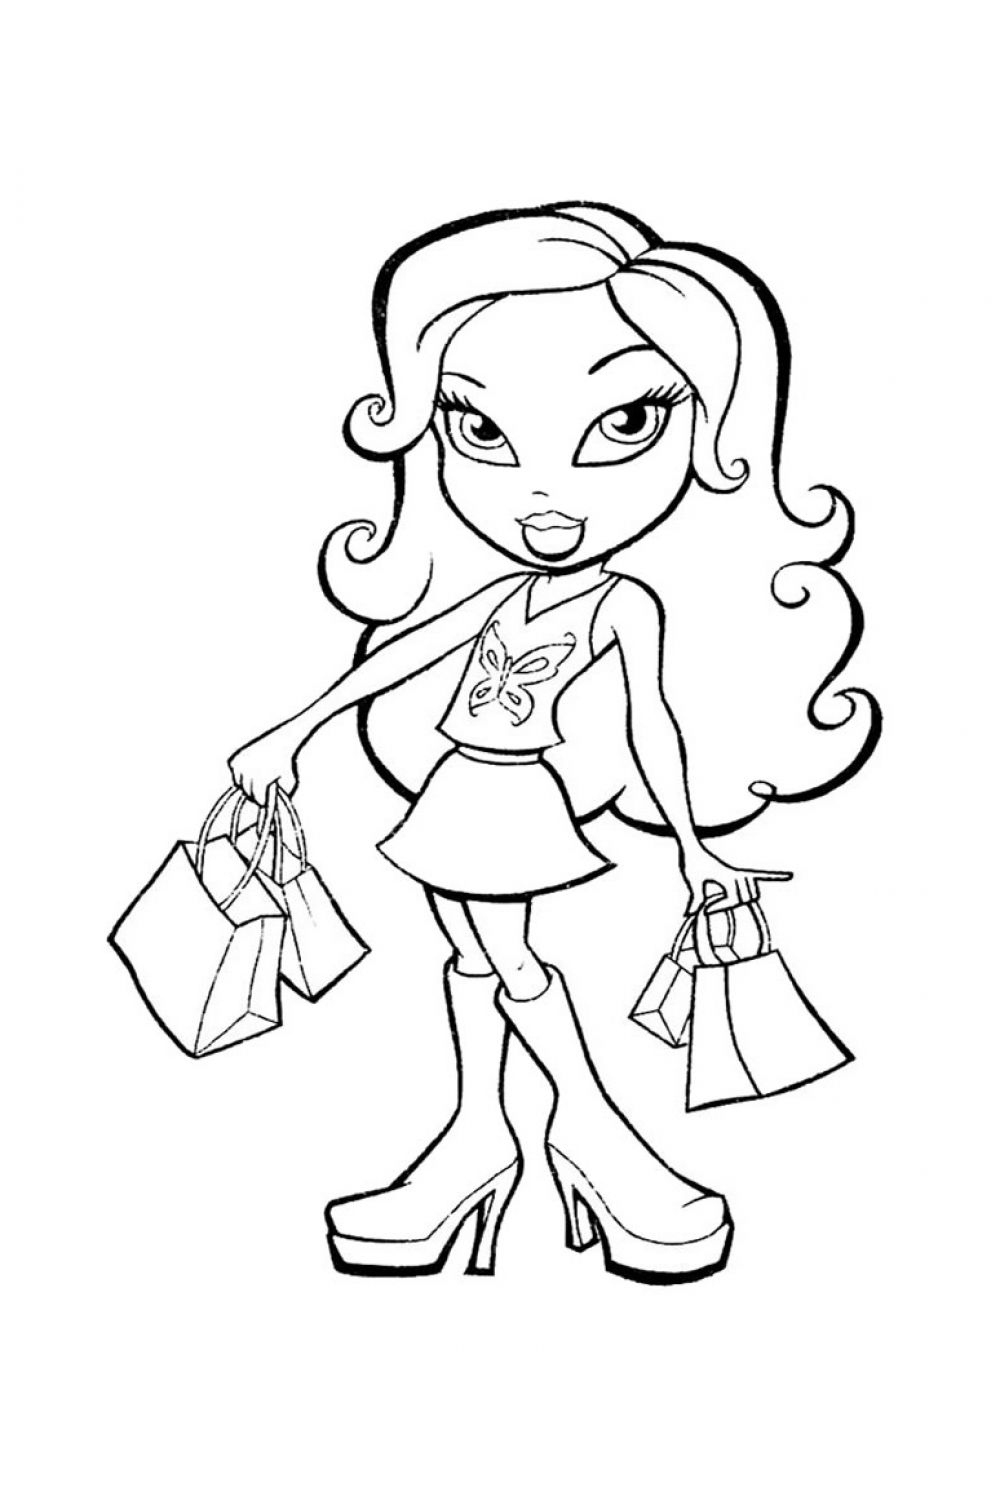 Bratz Dolls Coloring Pages. Print for free